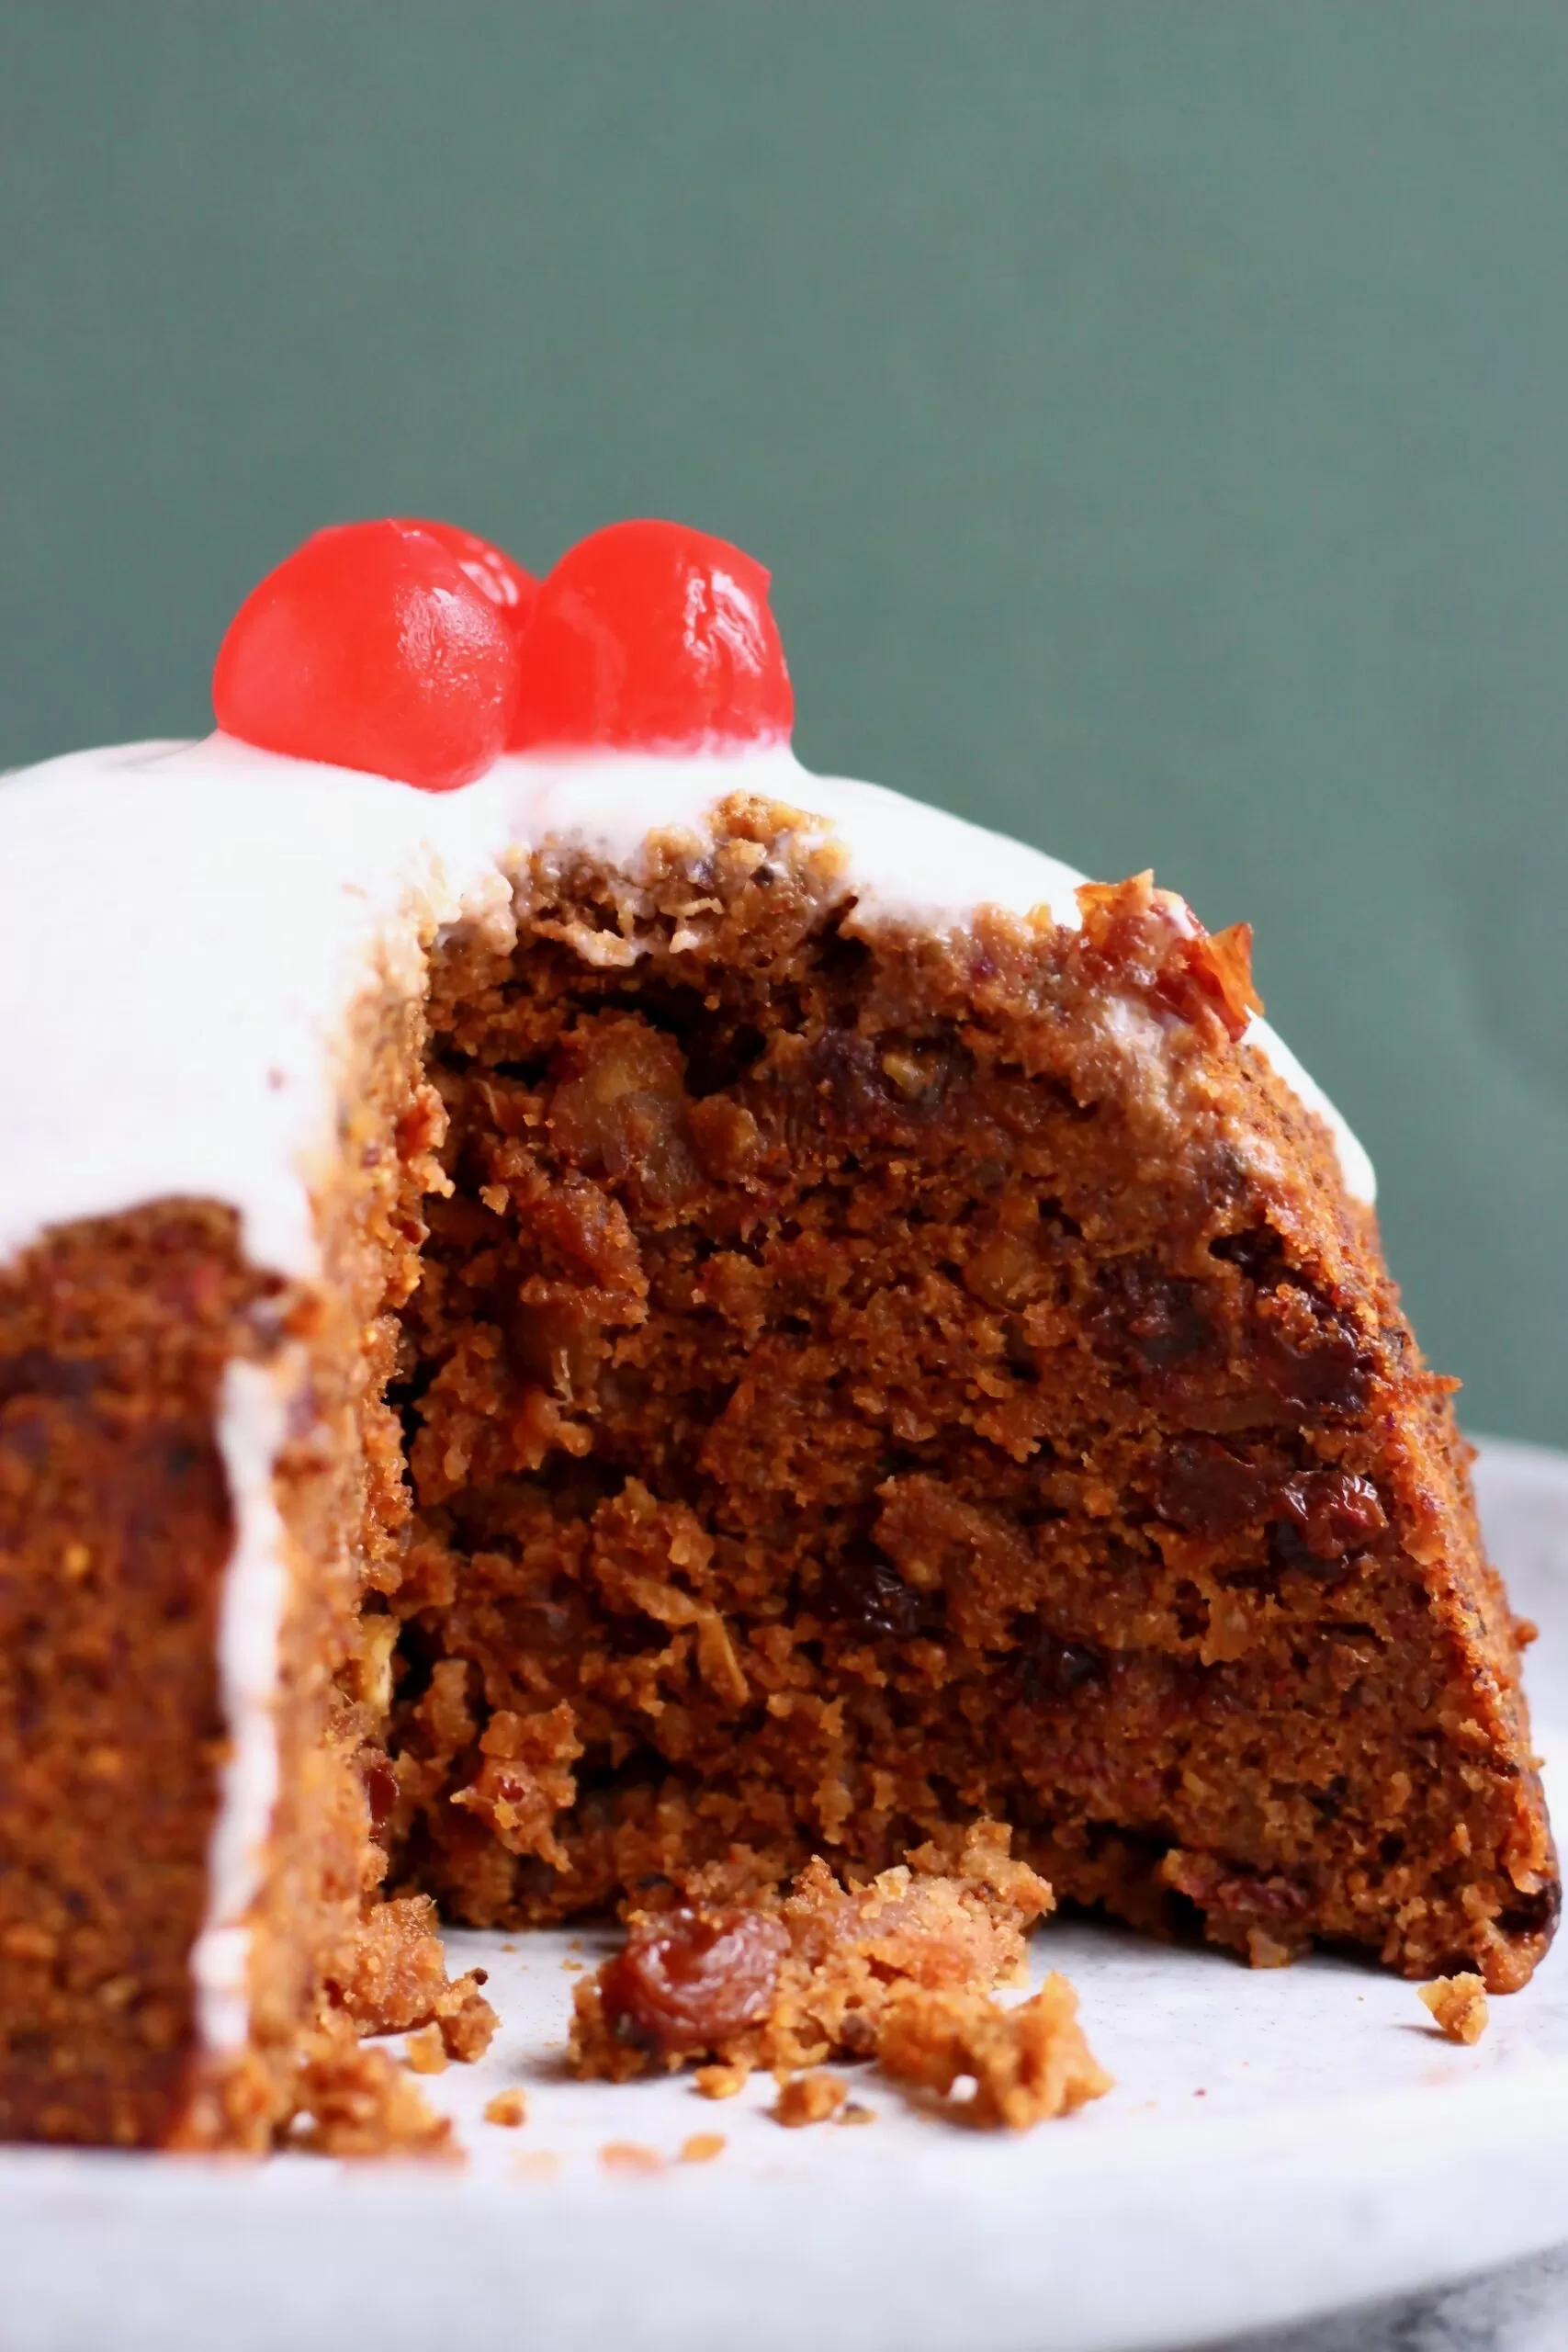 A round gluten-free vegan Christmas pudding with white cream poured over it topped with three red cherries